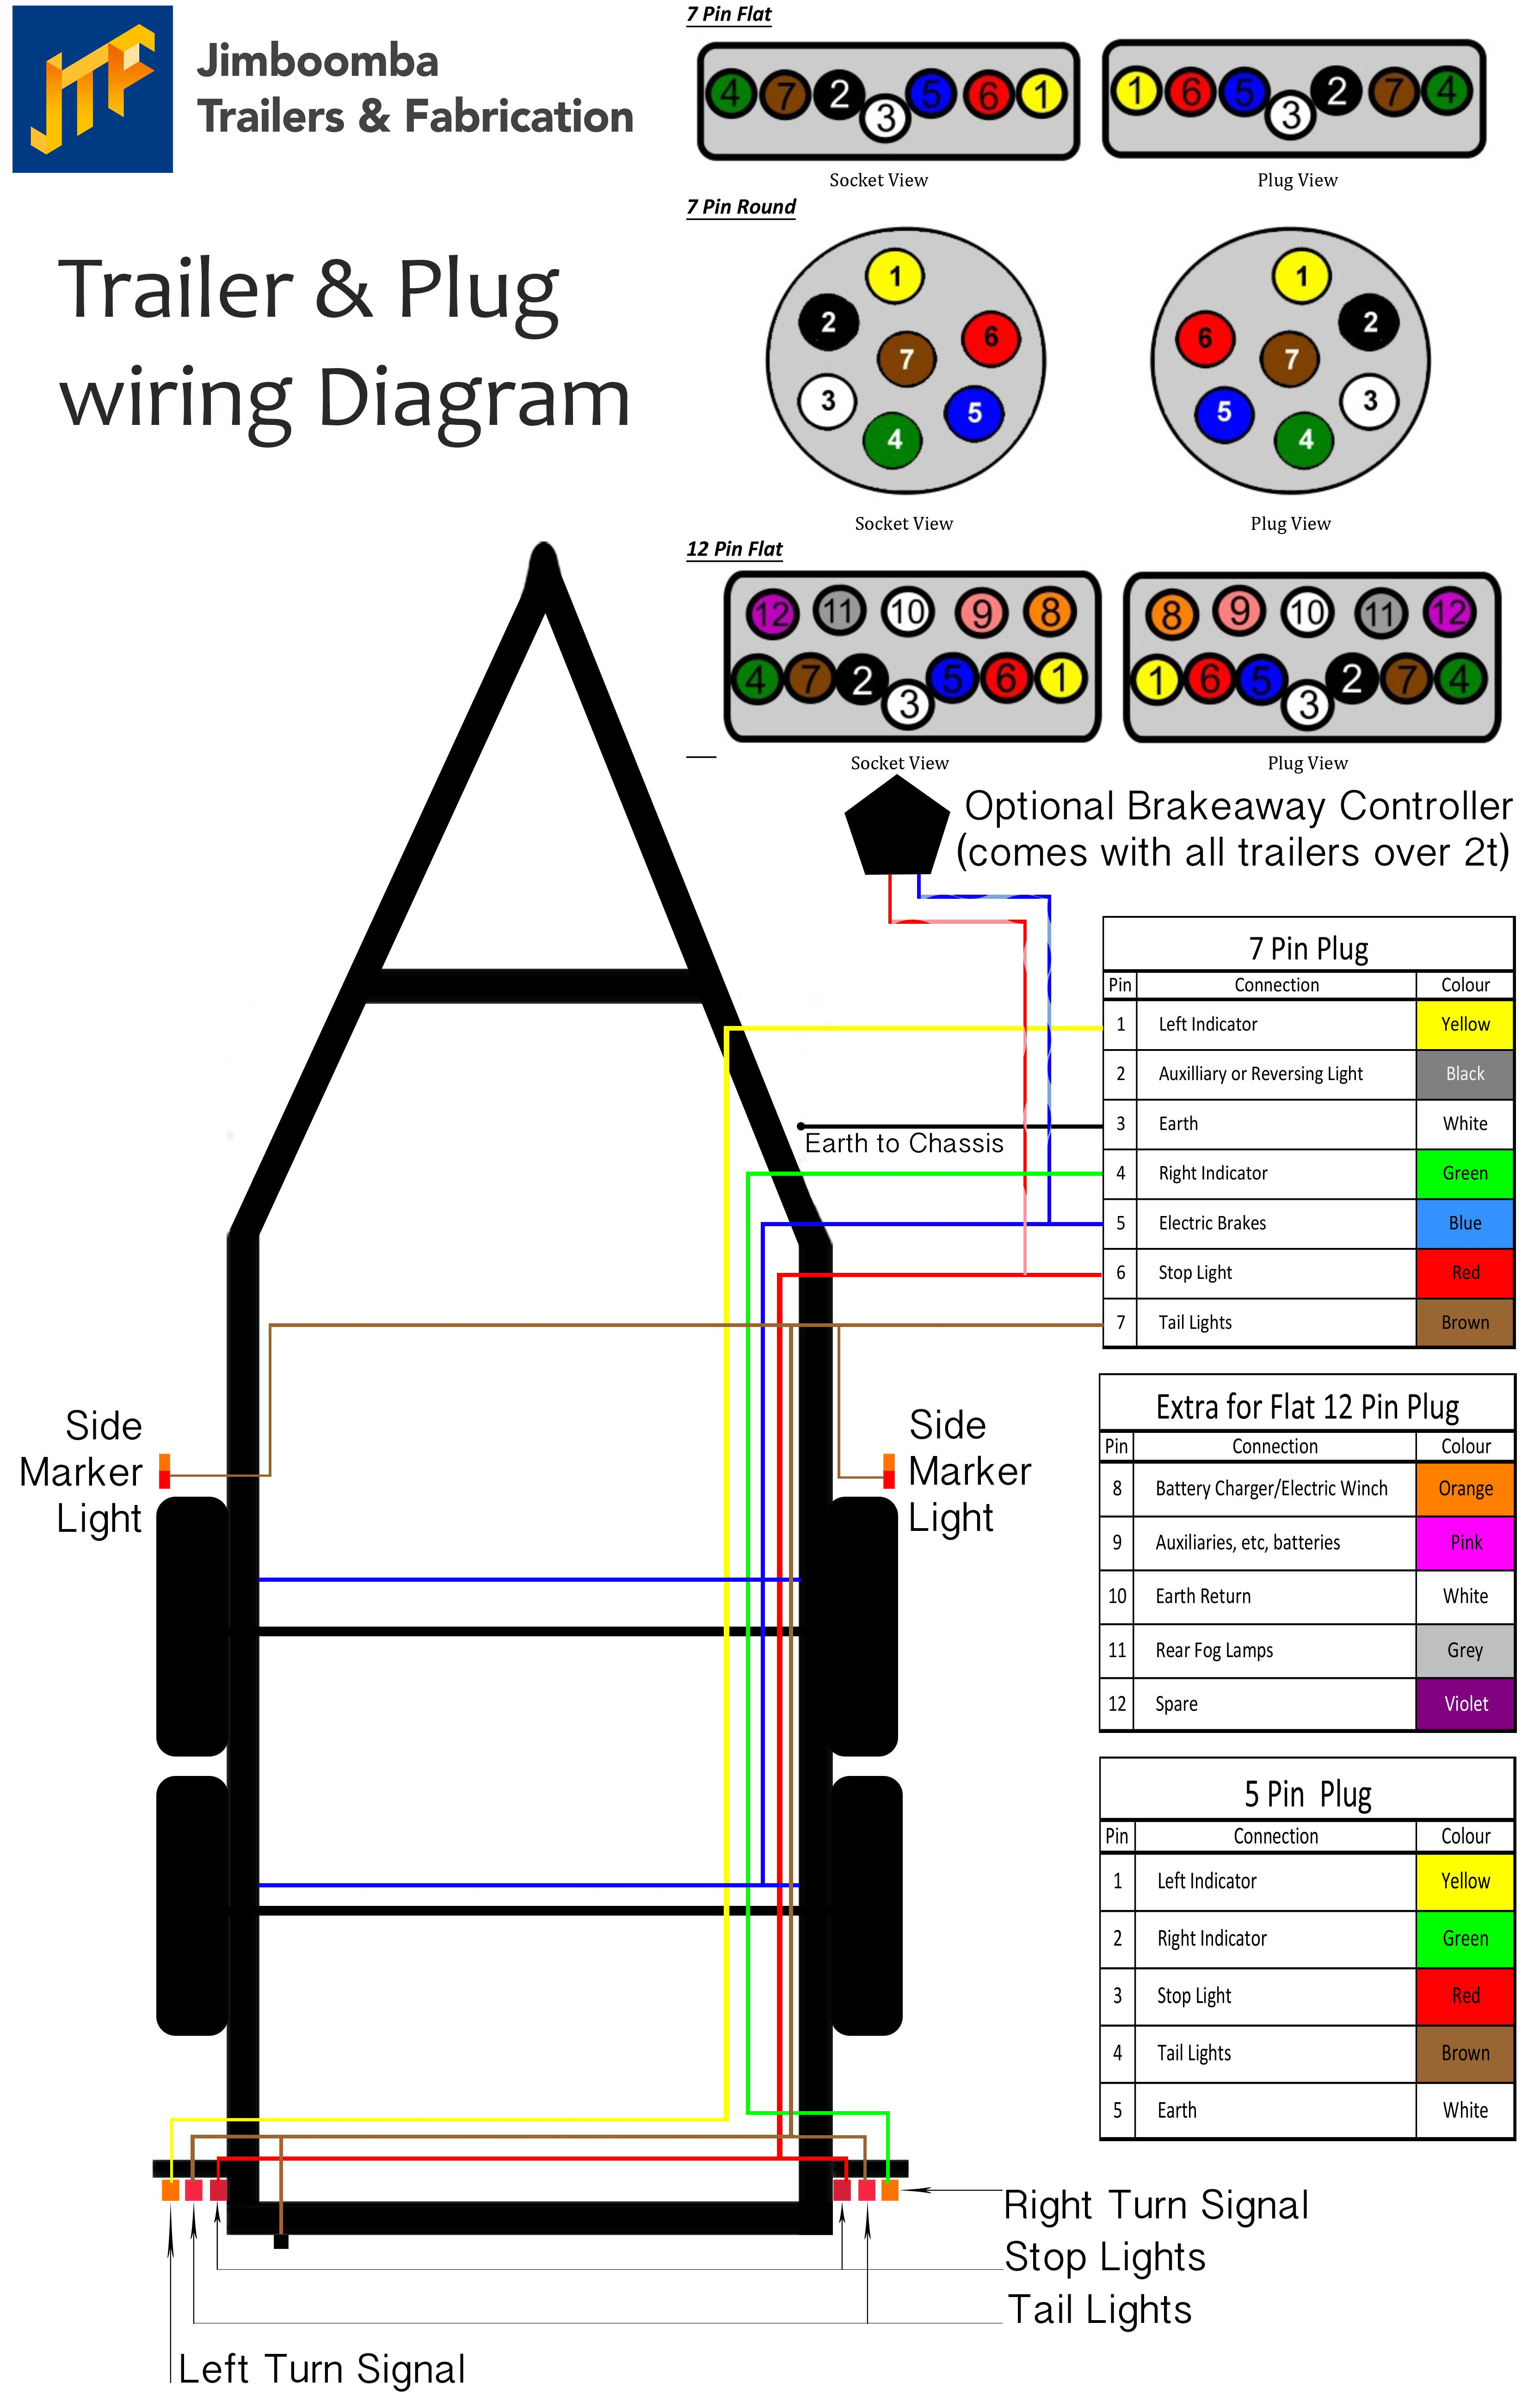 7 Wire Trailer Cable Diagram - Wiring Diagram Detailed - 7 Blade Wiring Diagram